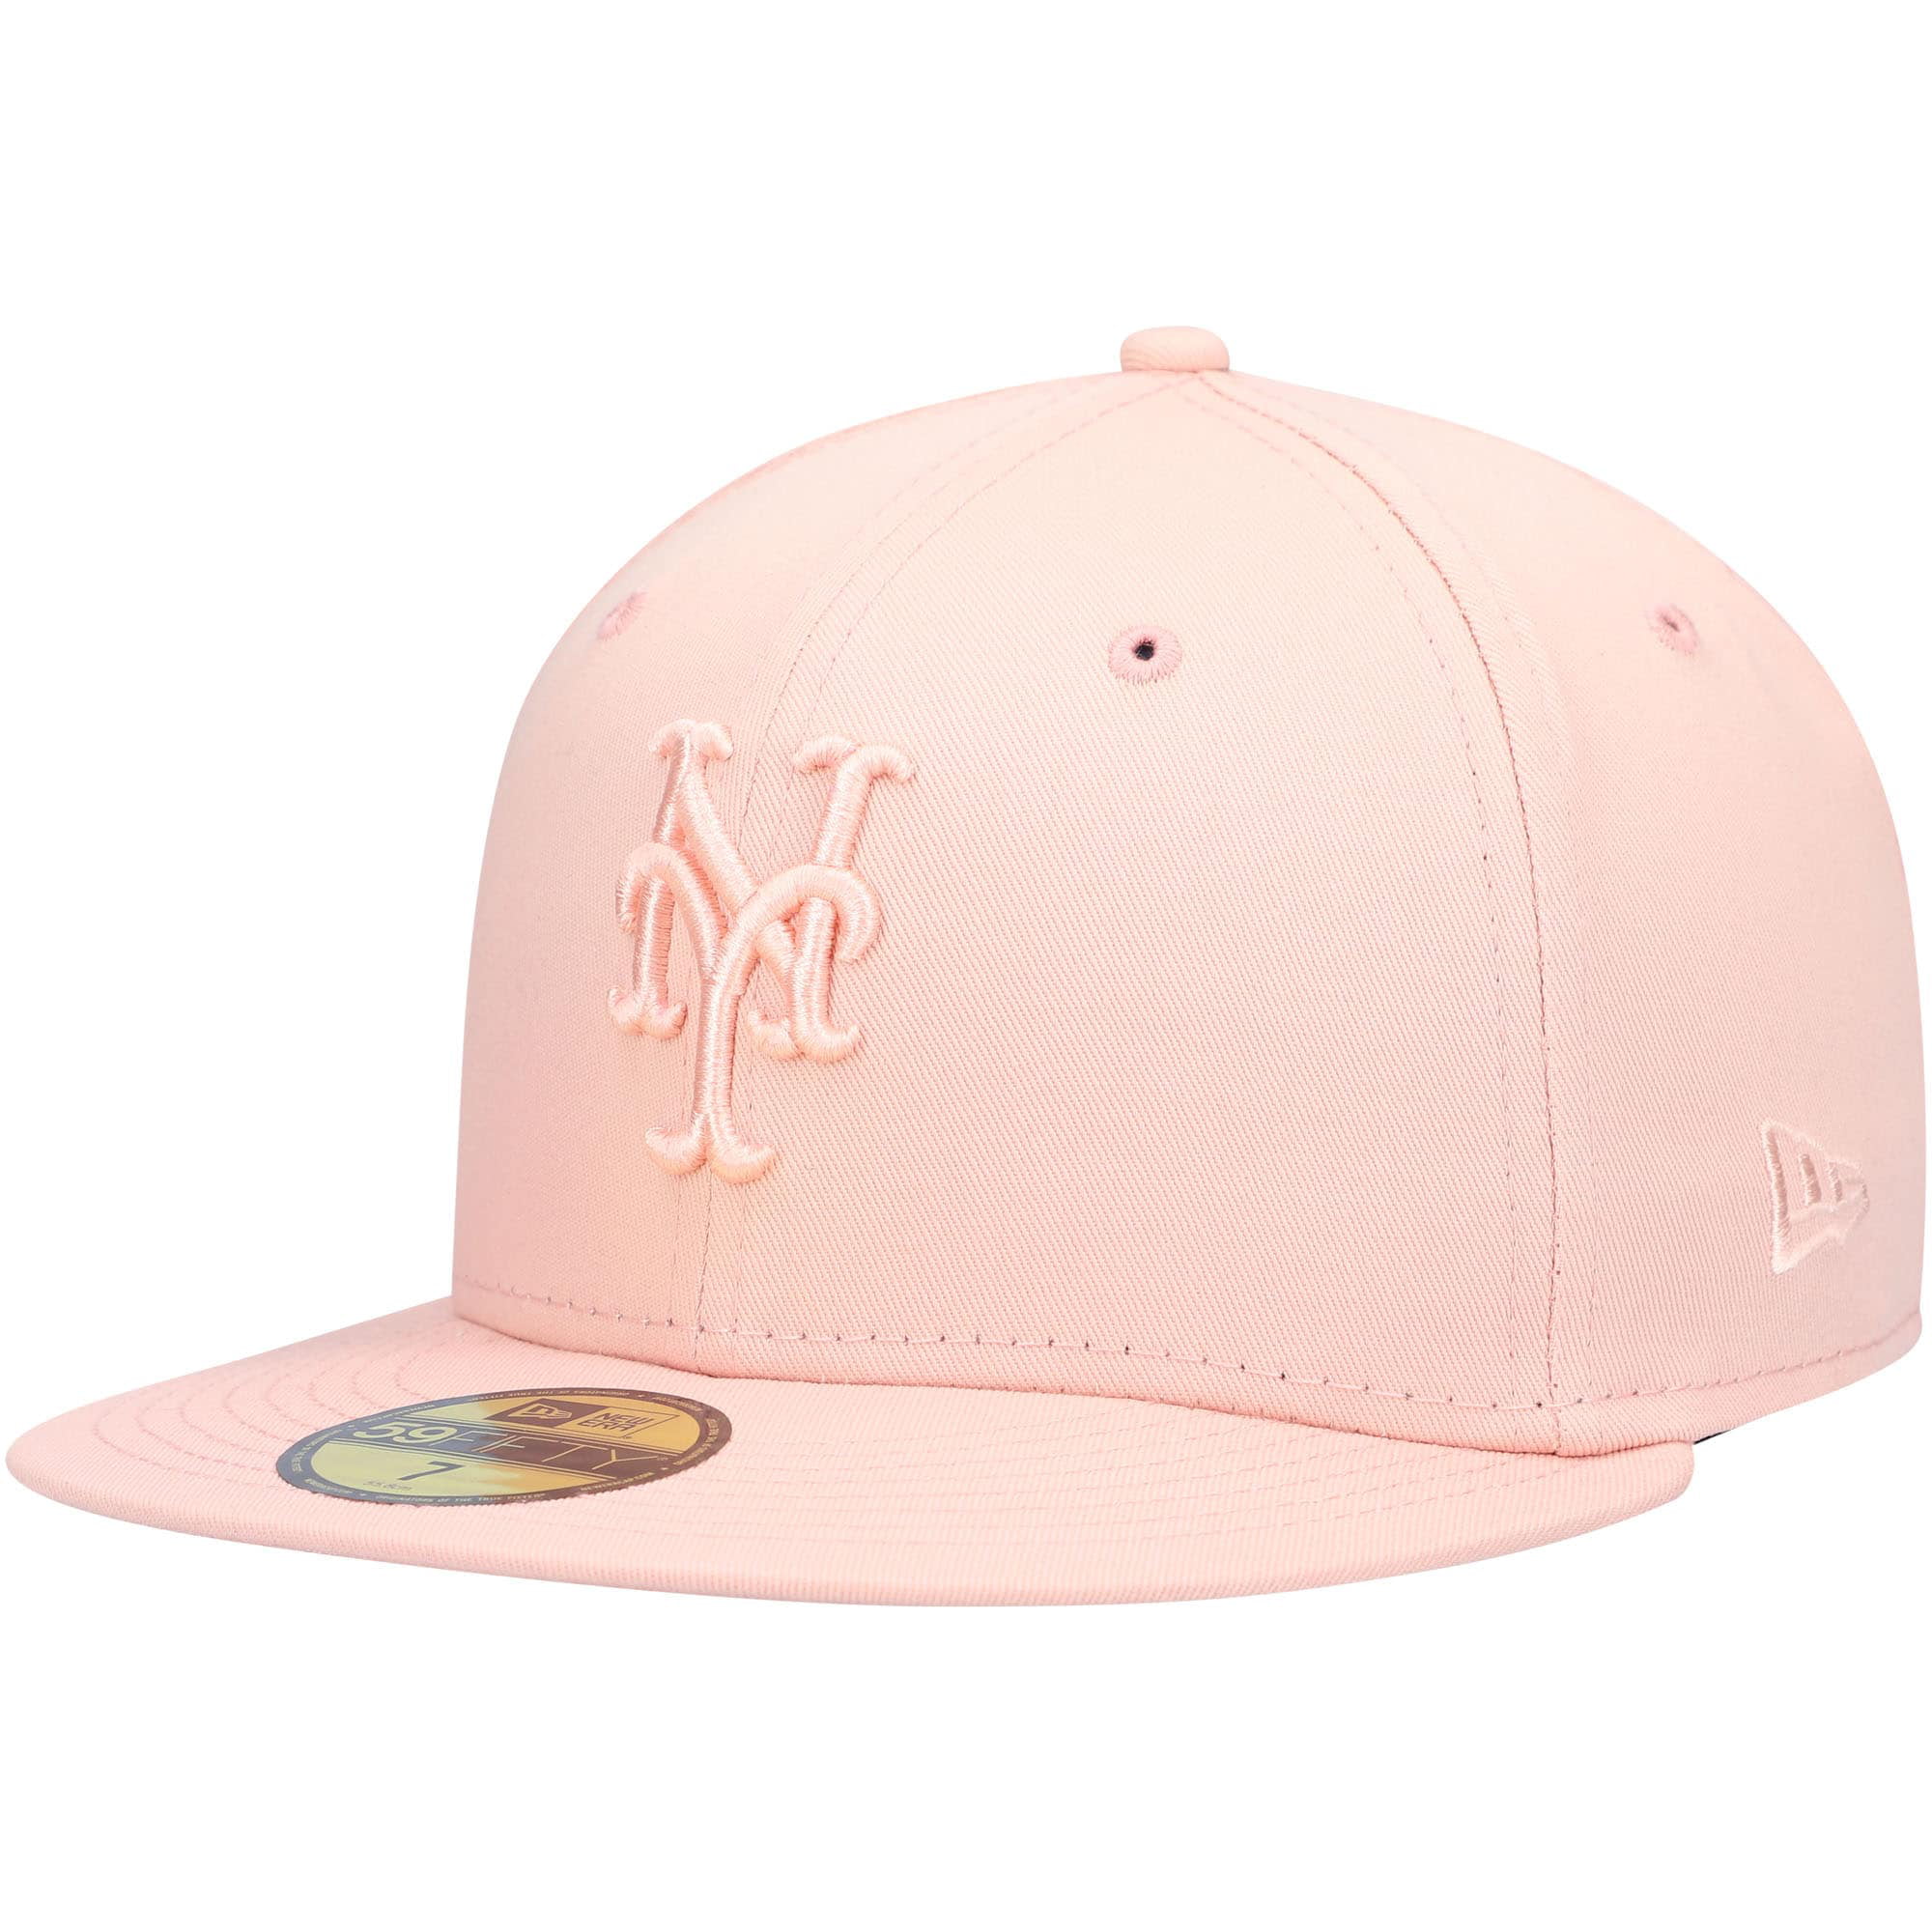 New York Mets PINK CADDY Fitted 7 1/2 Hat Cap